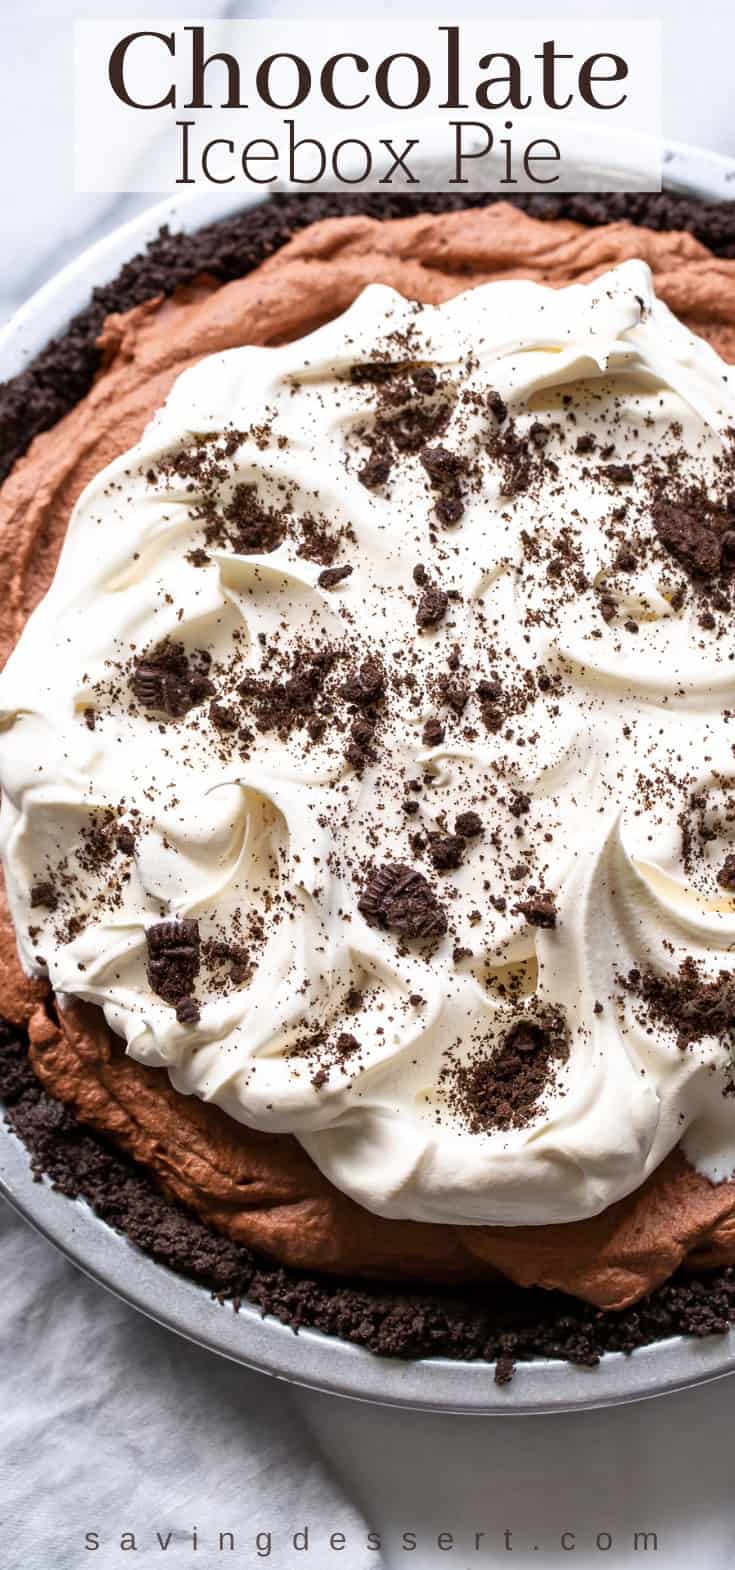 Chocolate Icebox Pie with whipped cream and cookies on top